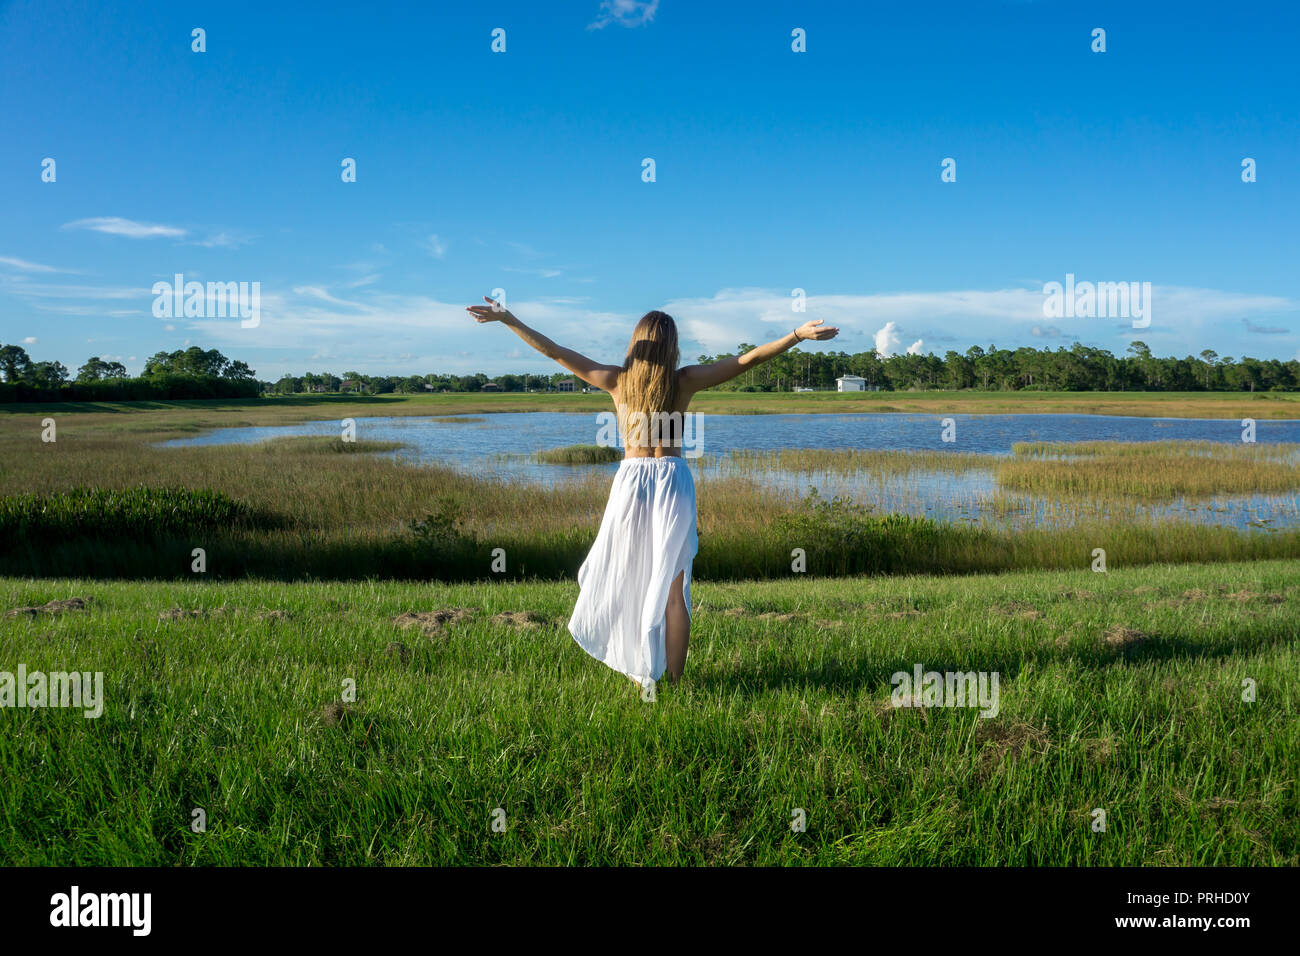 Blonde young woman standing backwards in a beautiful field landscape outdoors with raise hands arms to the sky Stock Photo